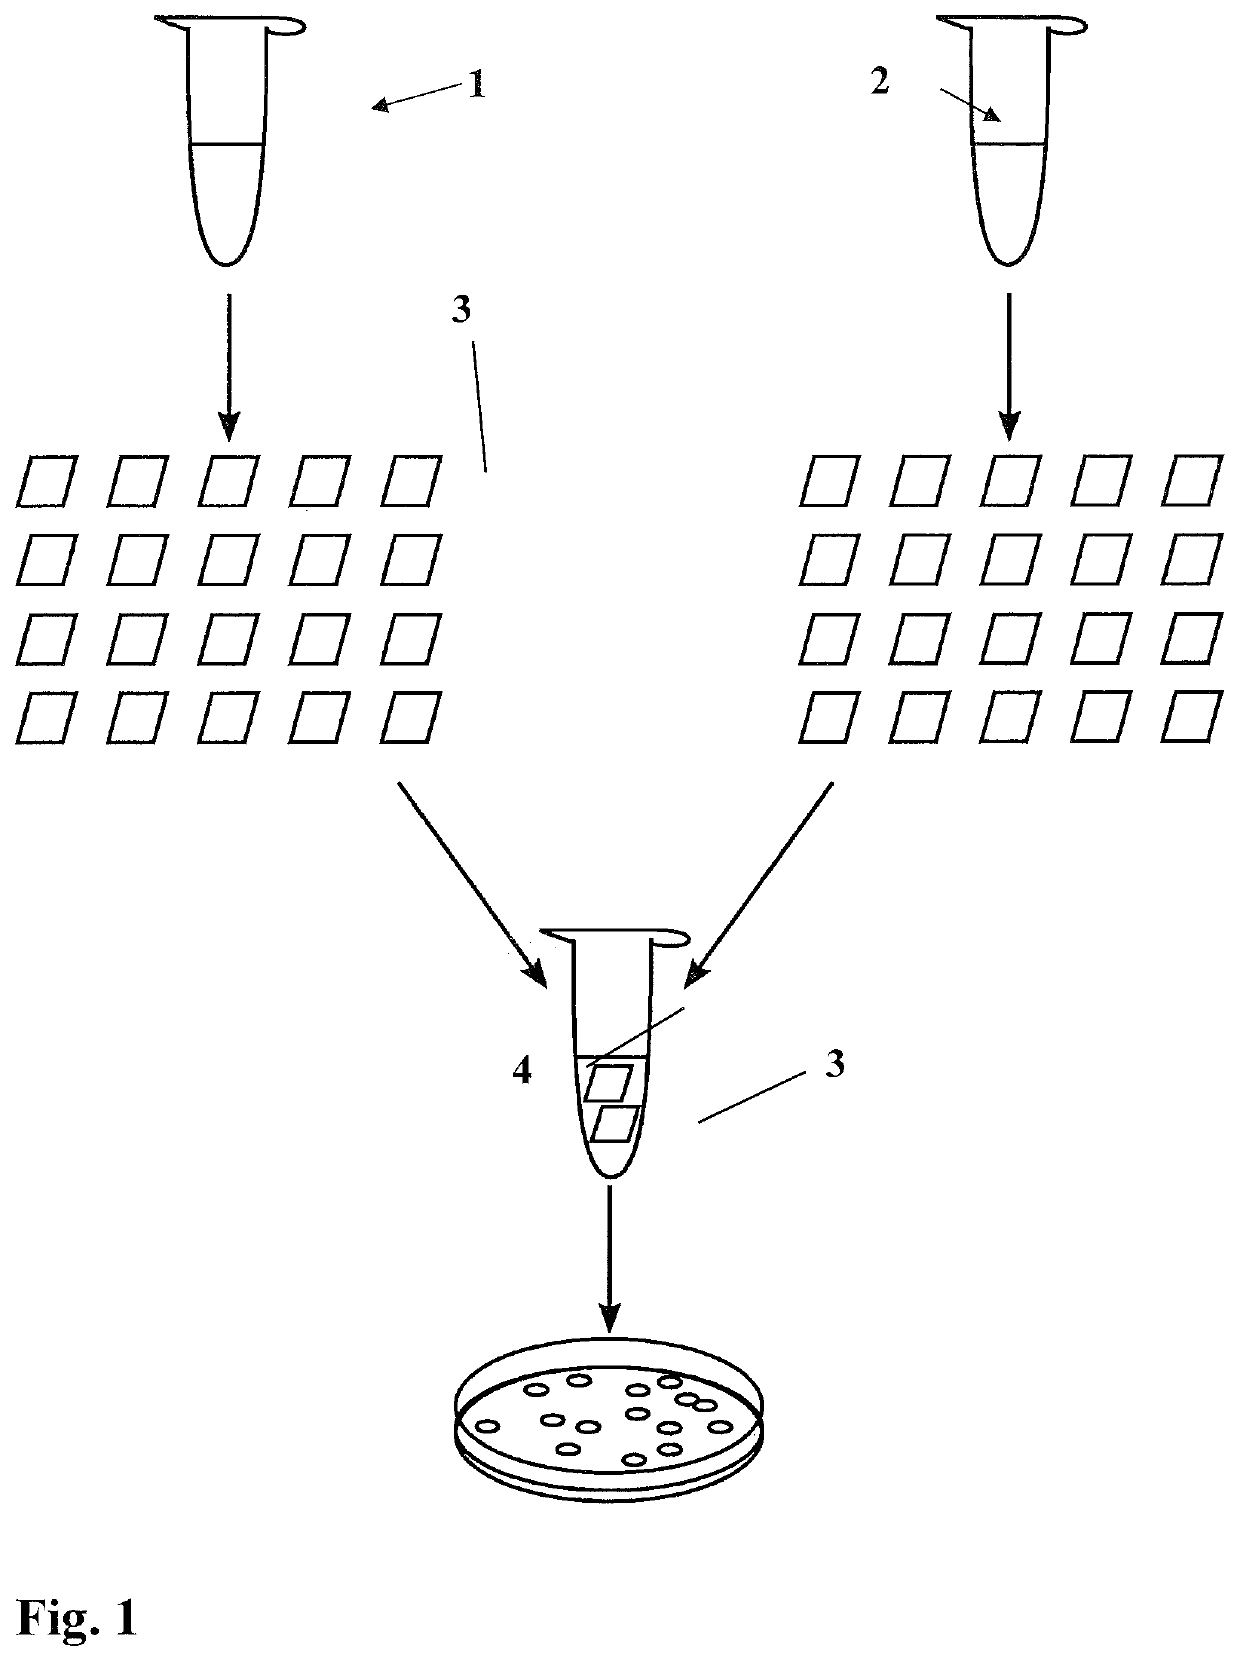 Method, substrate and kit for one-pot one-step assembly of DNA molecules